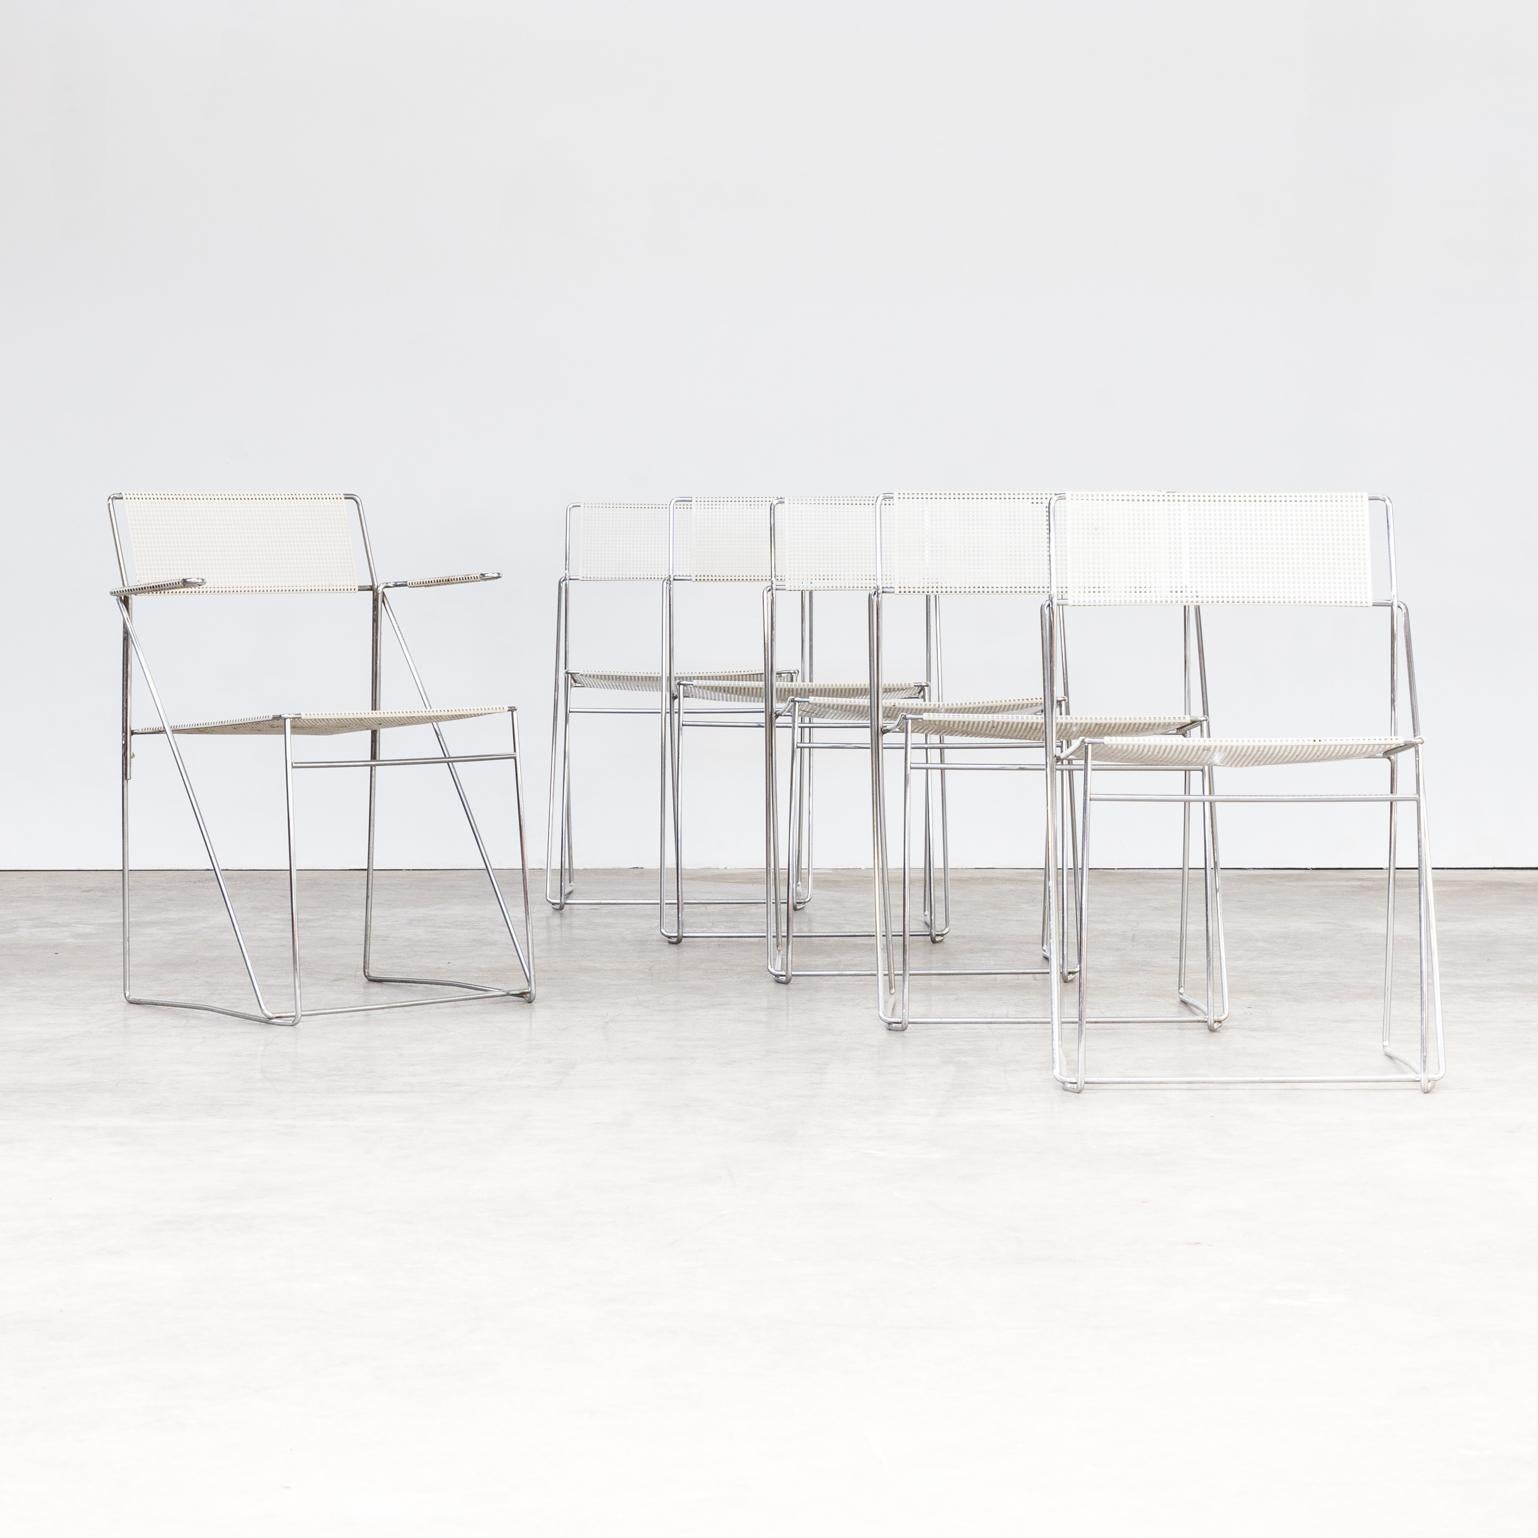 1970s Niels Jorgen Haugesen ‘Nuova’ stackable chairs for Hybodan set of 6. One set of six Nuova chrome framed and metal lacquered chairs. 1 piece with armrests. Good condition consistent with age and use.